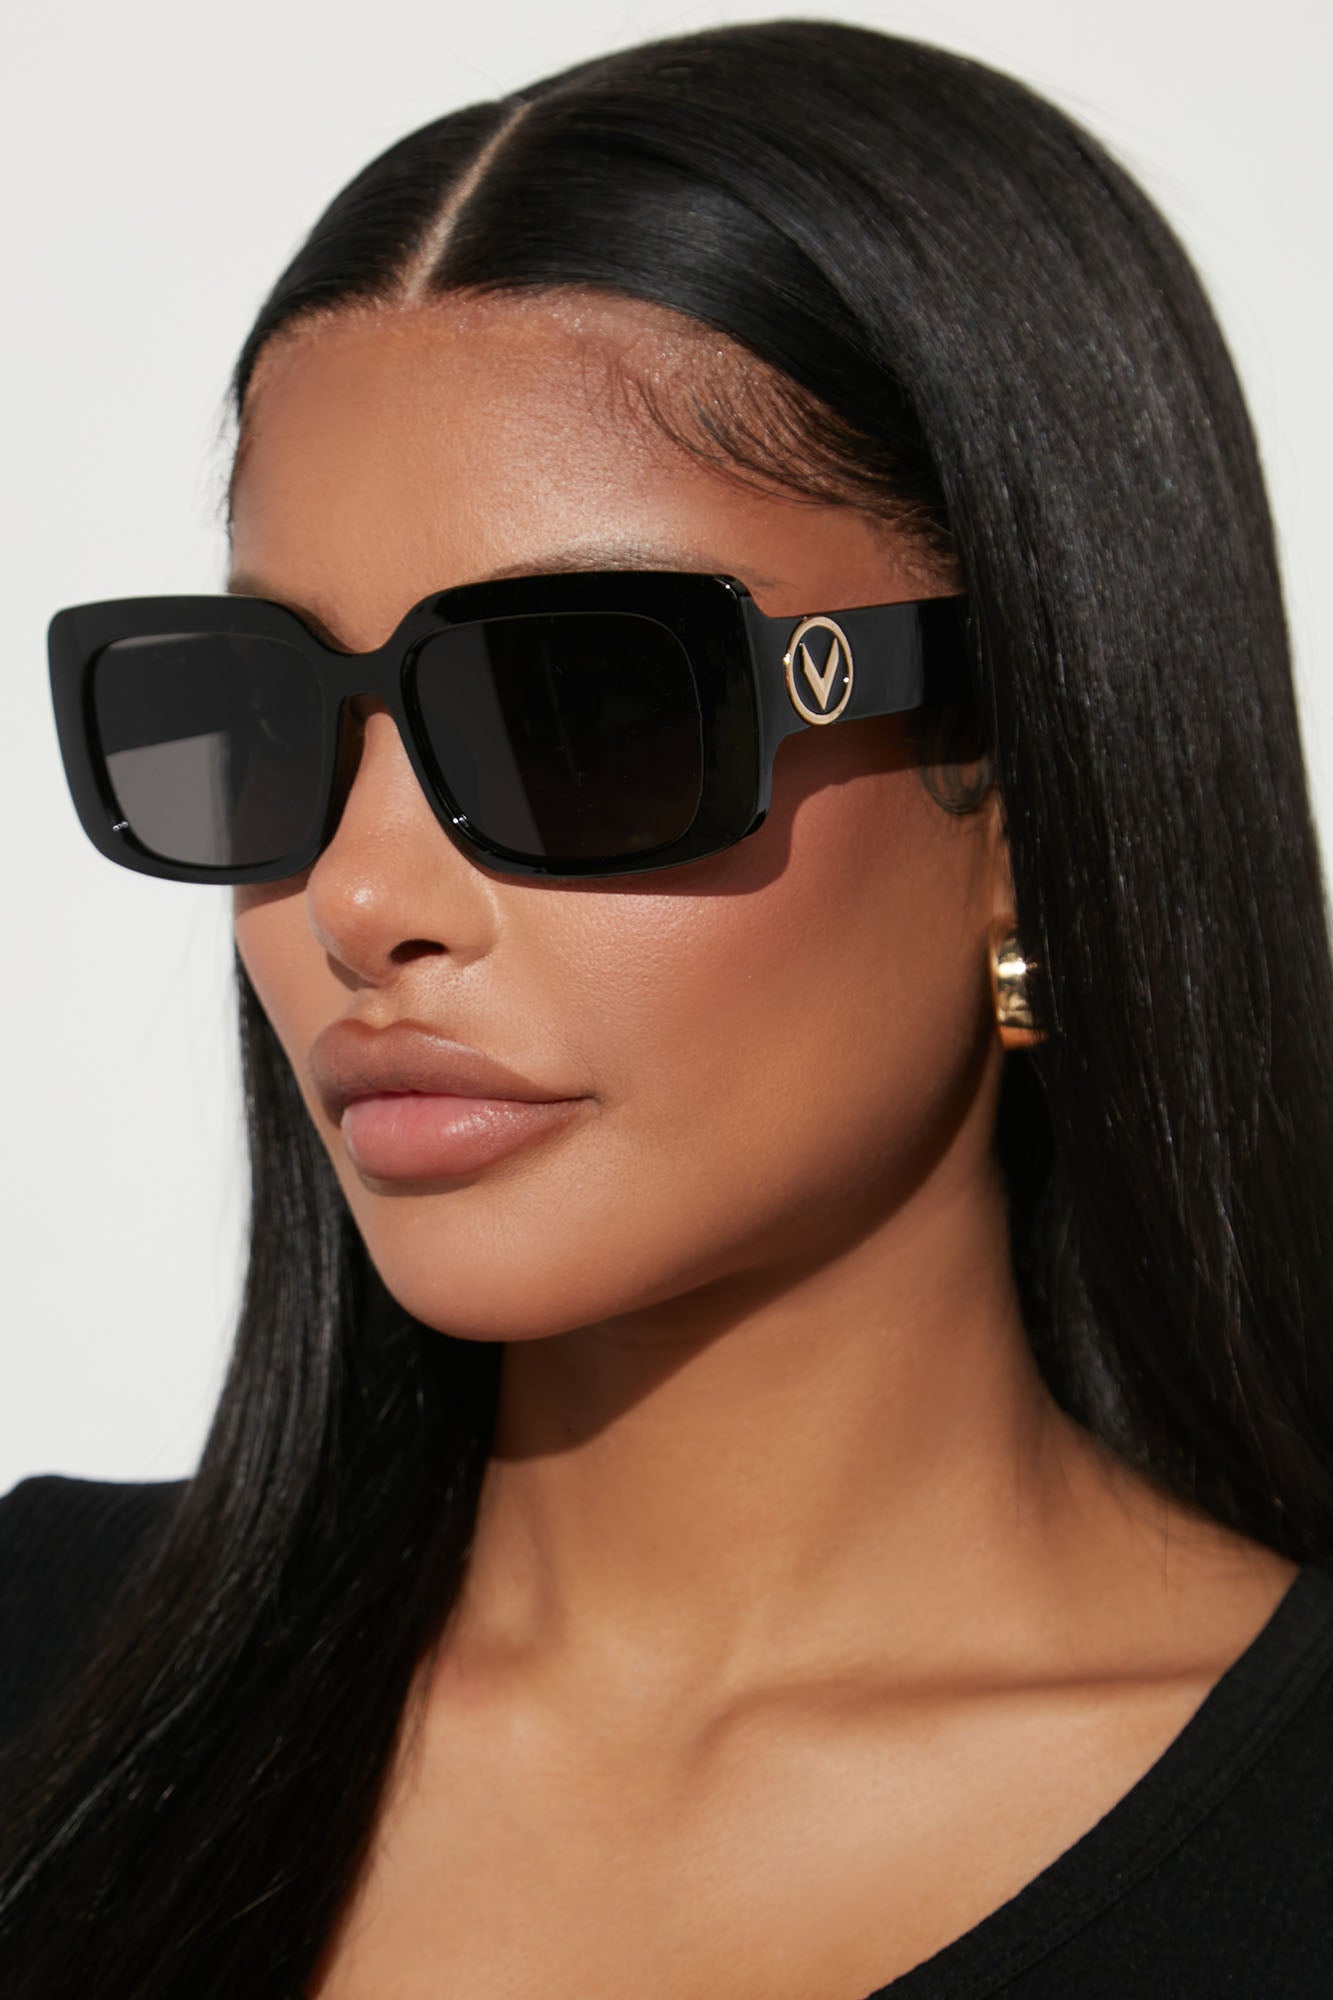 Women's Intrigued in Black by You Sunglasses in Black by Fashion Nova | Fashion Nova